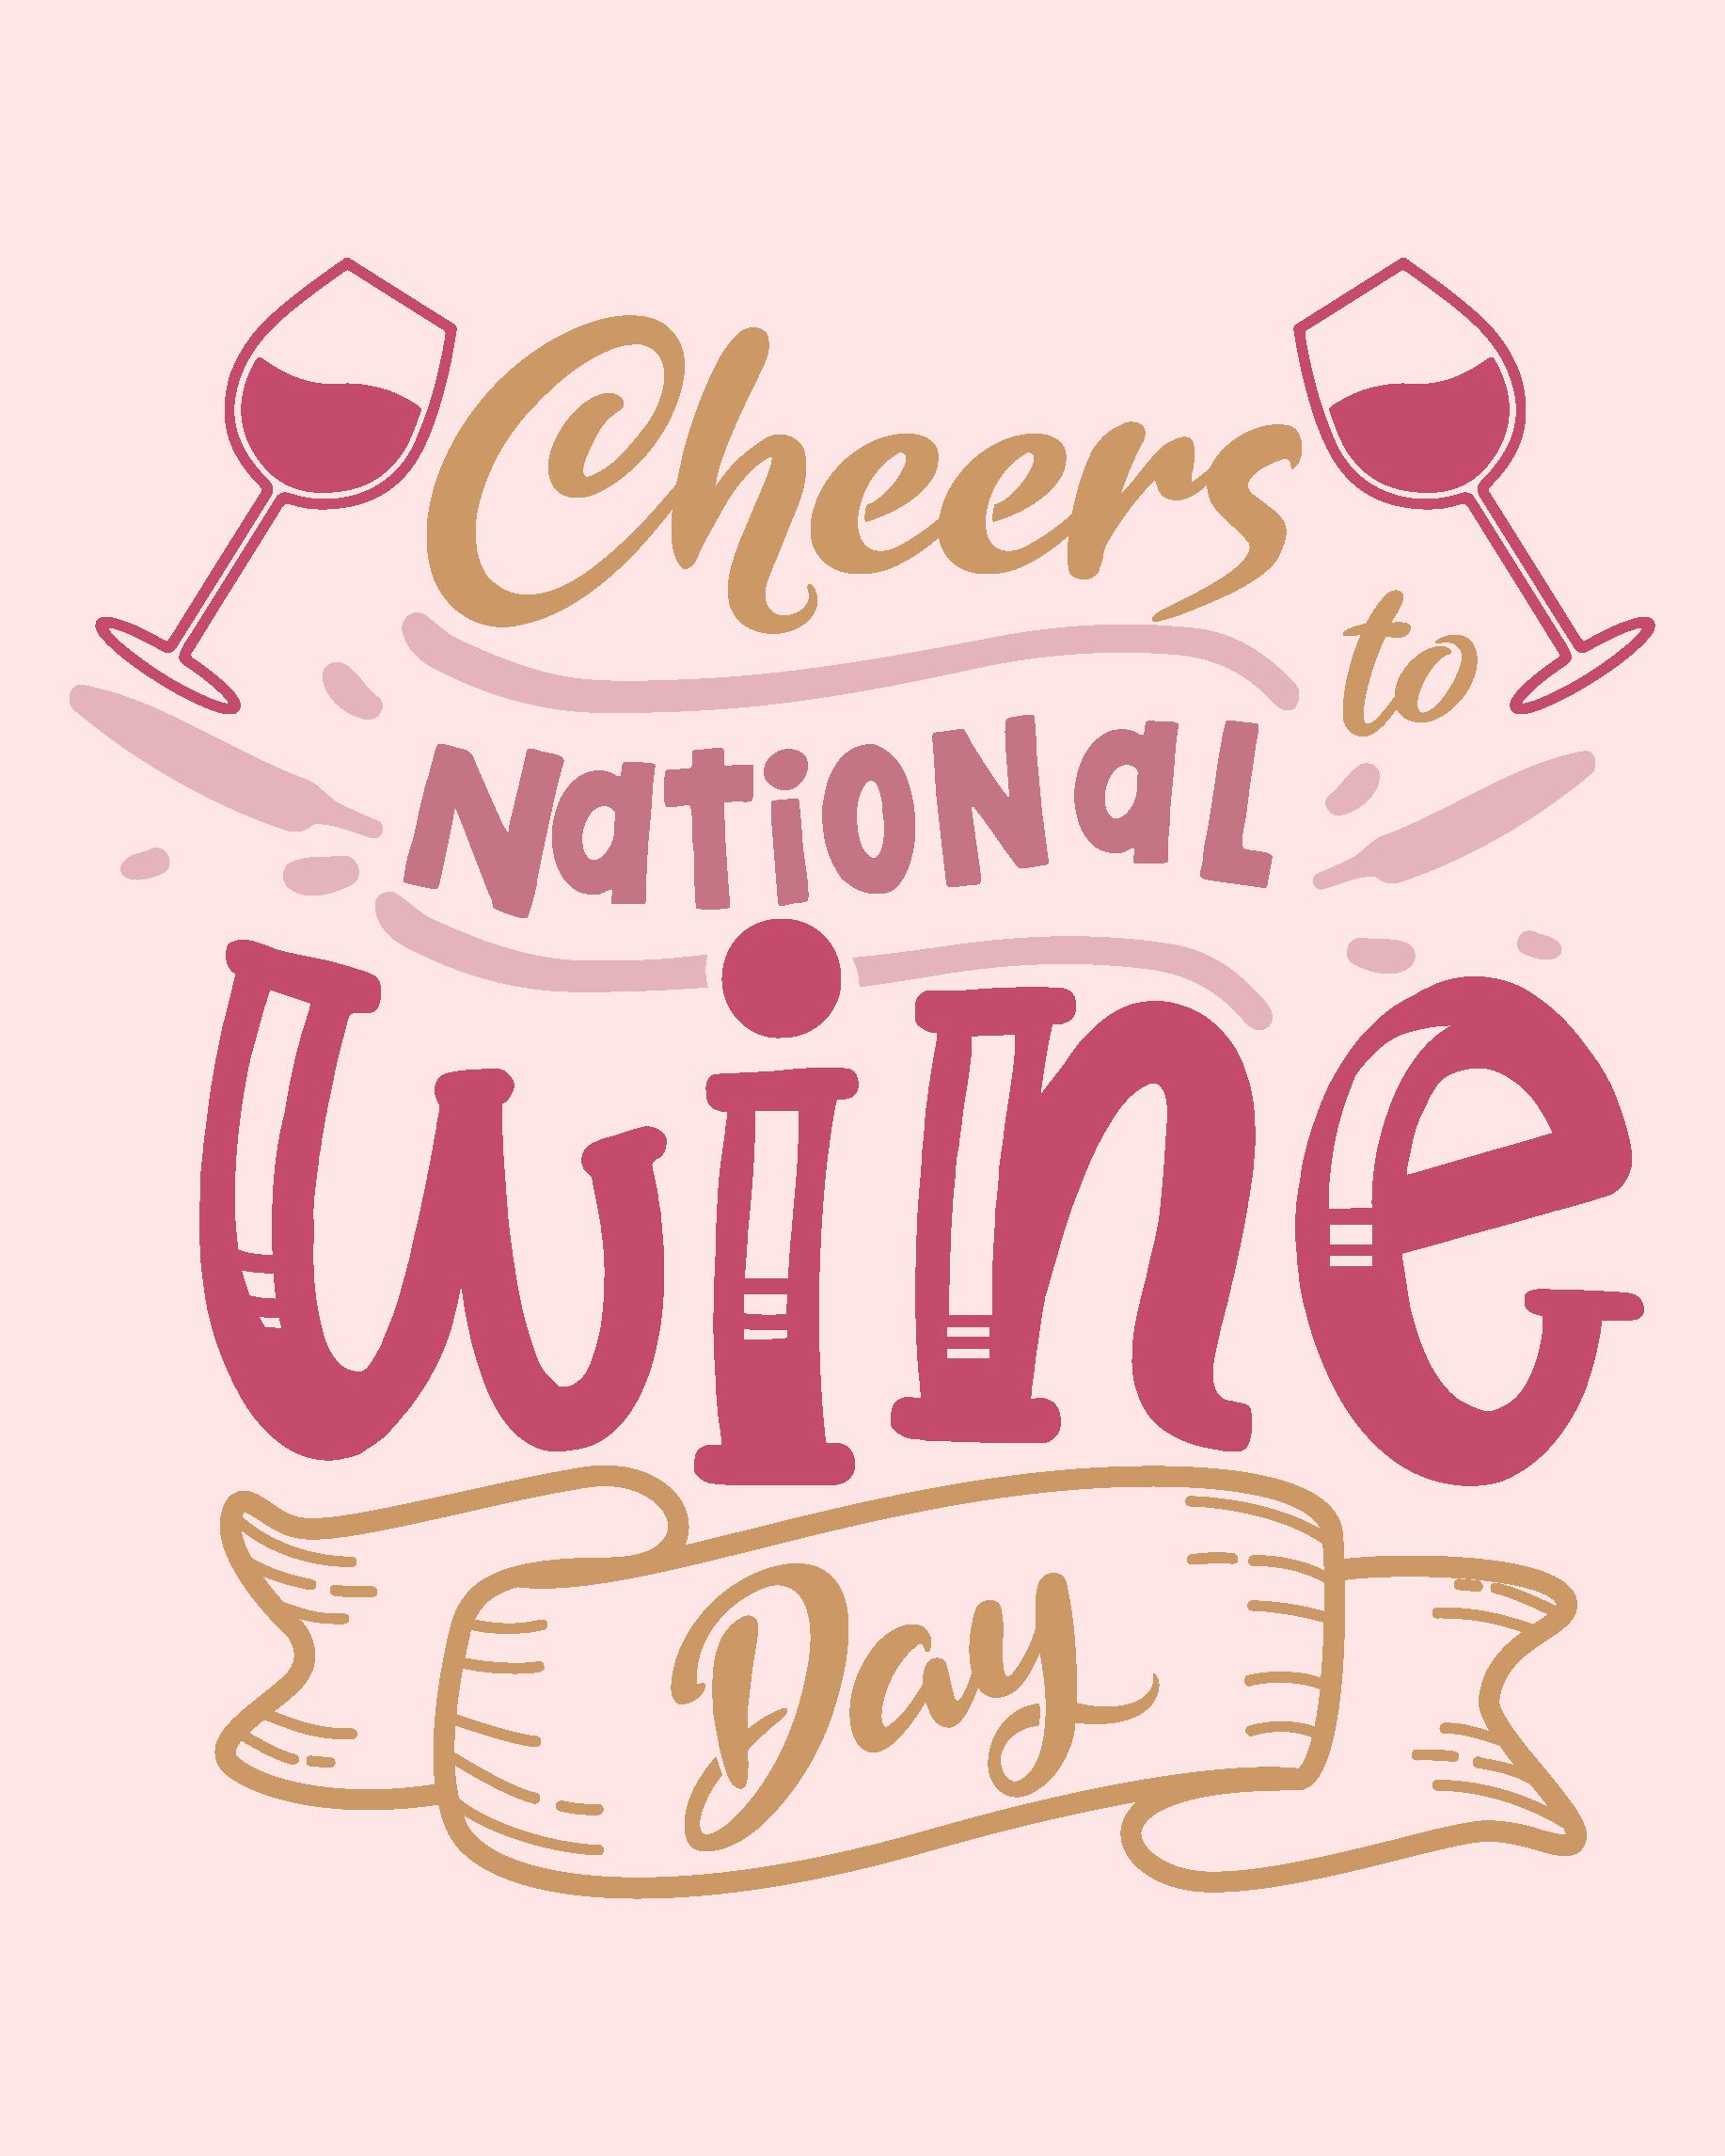 Cheers online National Wine Day Card